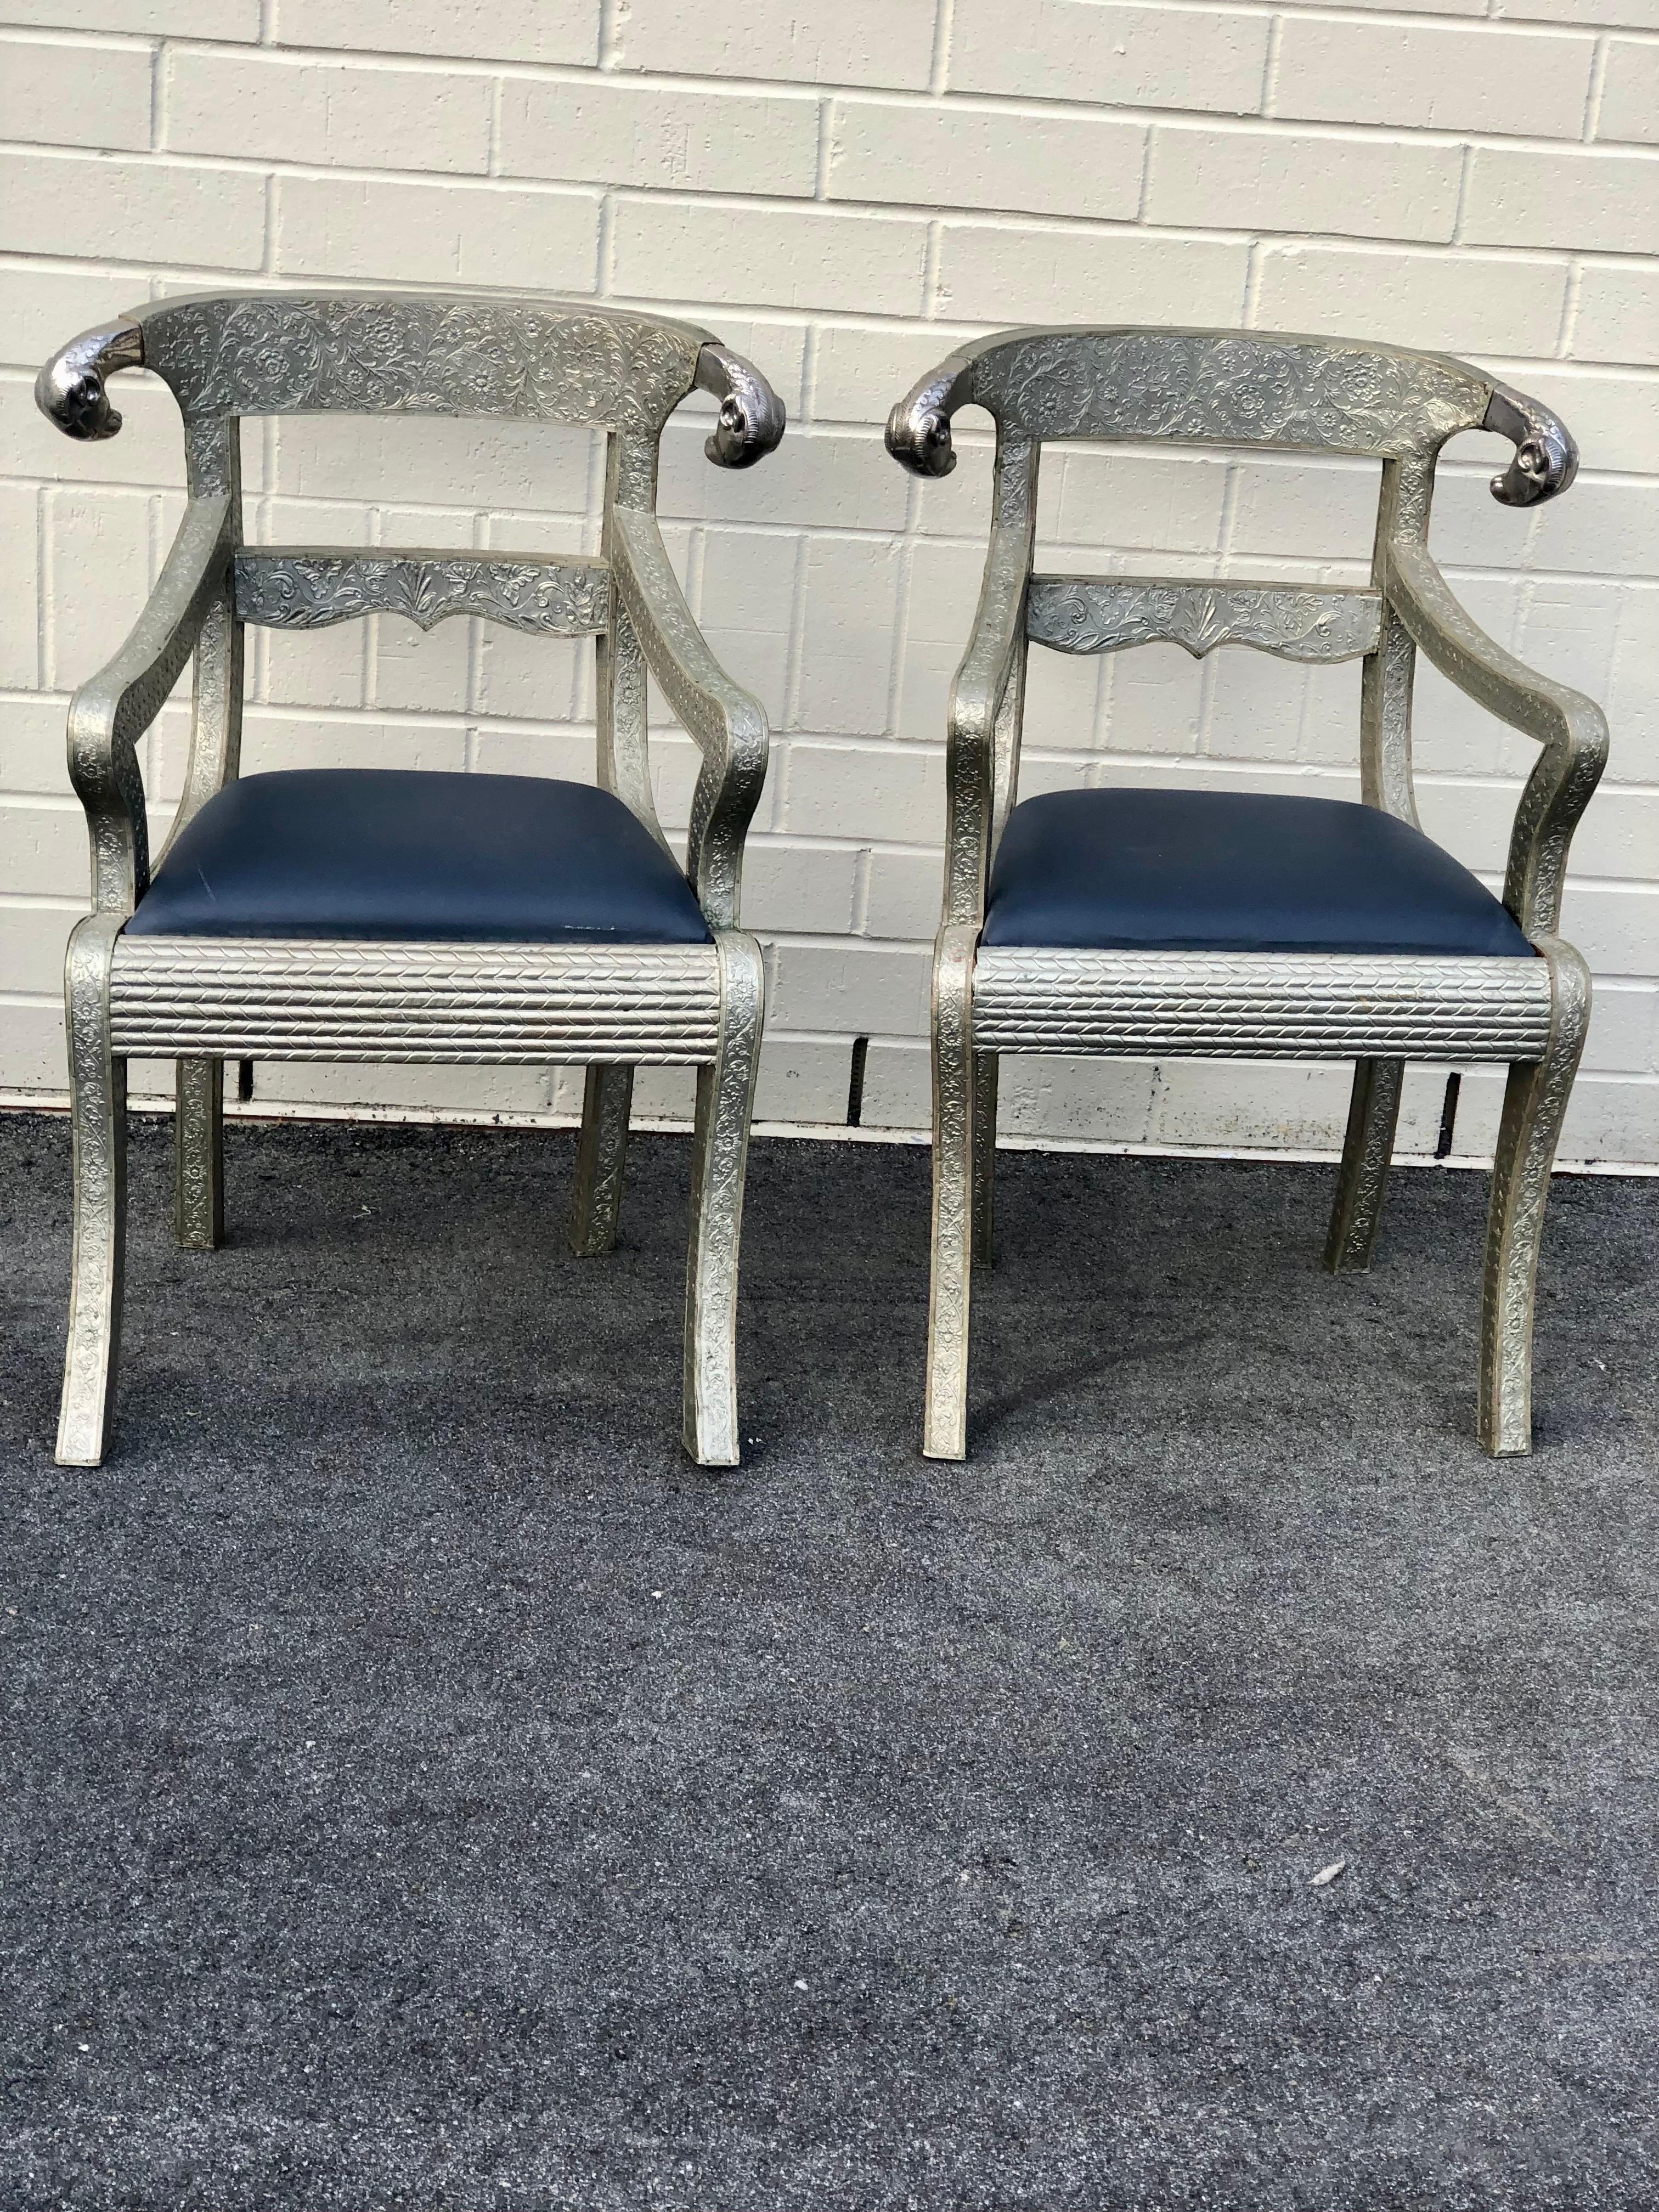 A magnificent and striking pair of Anglo Indian armchairs adorned with intricate silver metal cladding and embellished with captivating Rams Heads motifs. These armchairs seamlessly blend the opulent essence of British colonial design with the